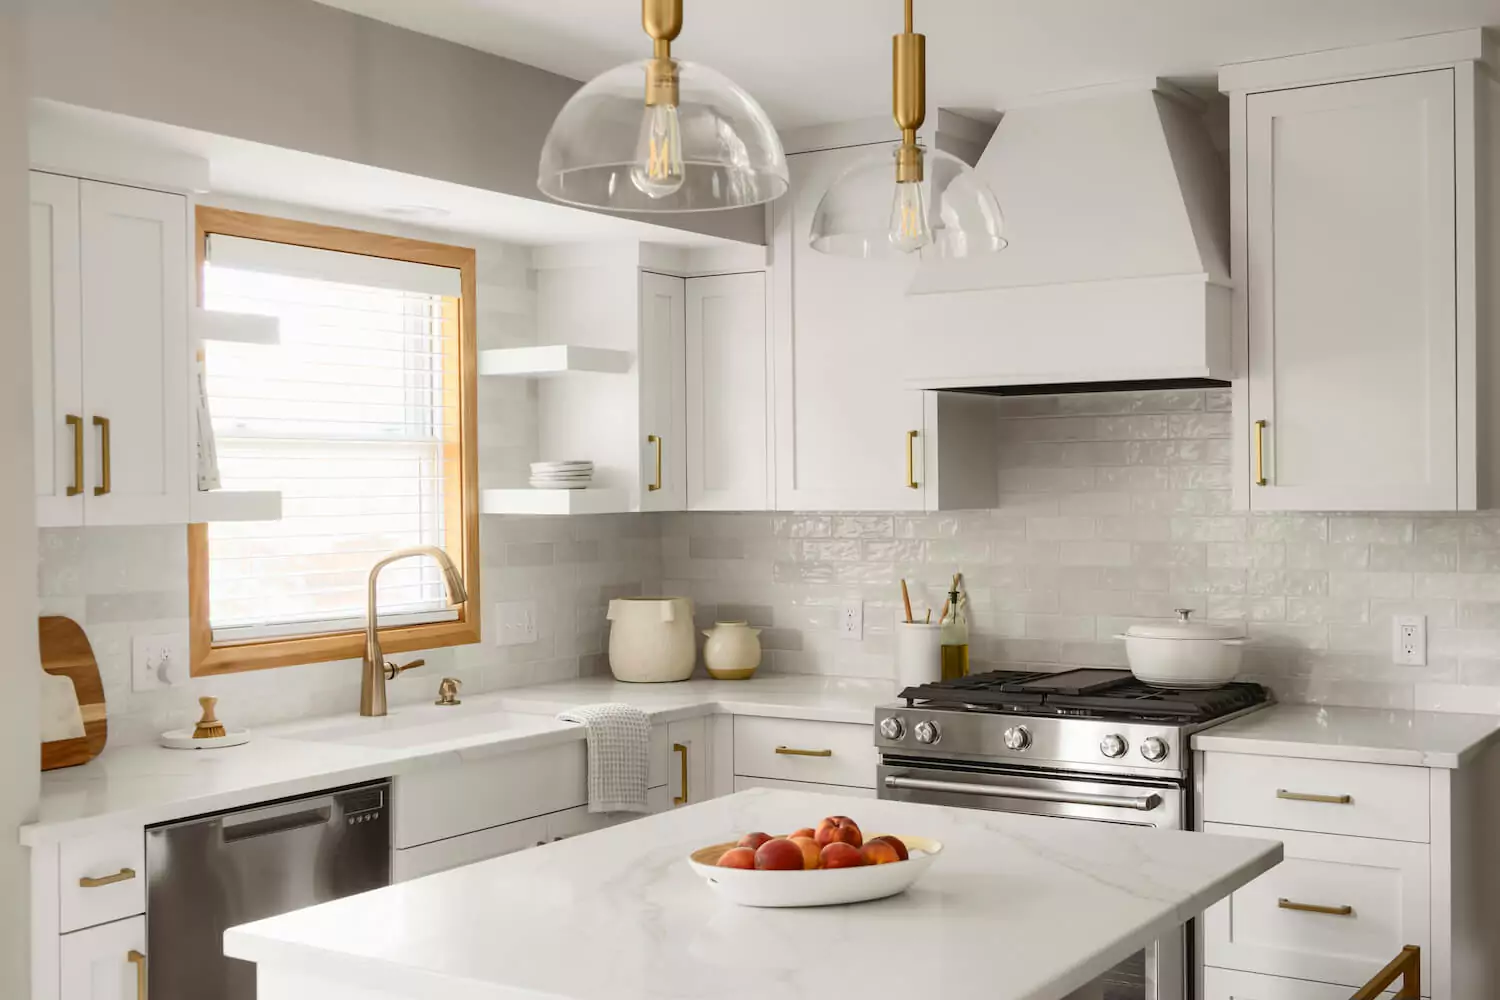 Monochromatic kitchen design with white as the primary color and gold accents.